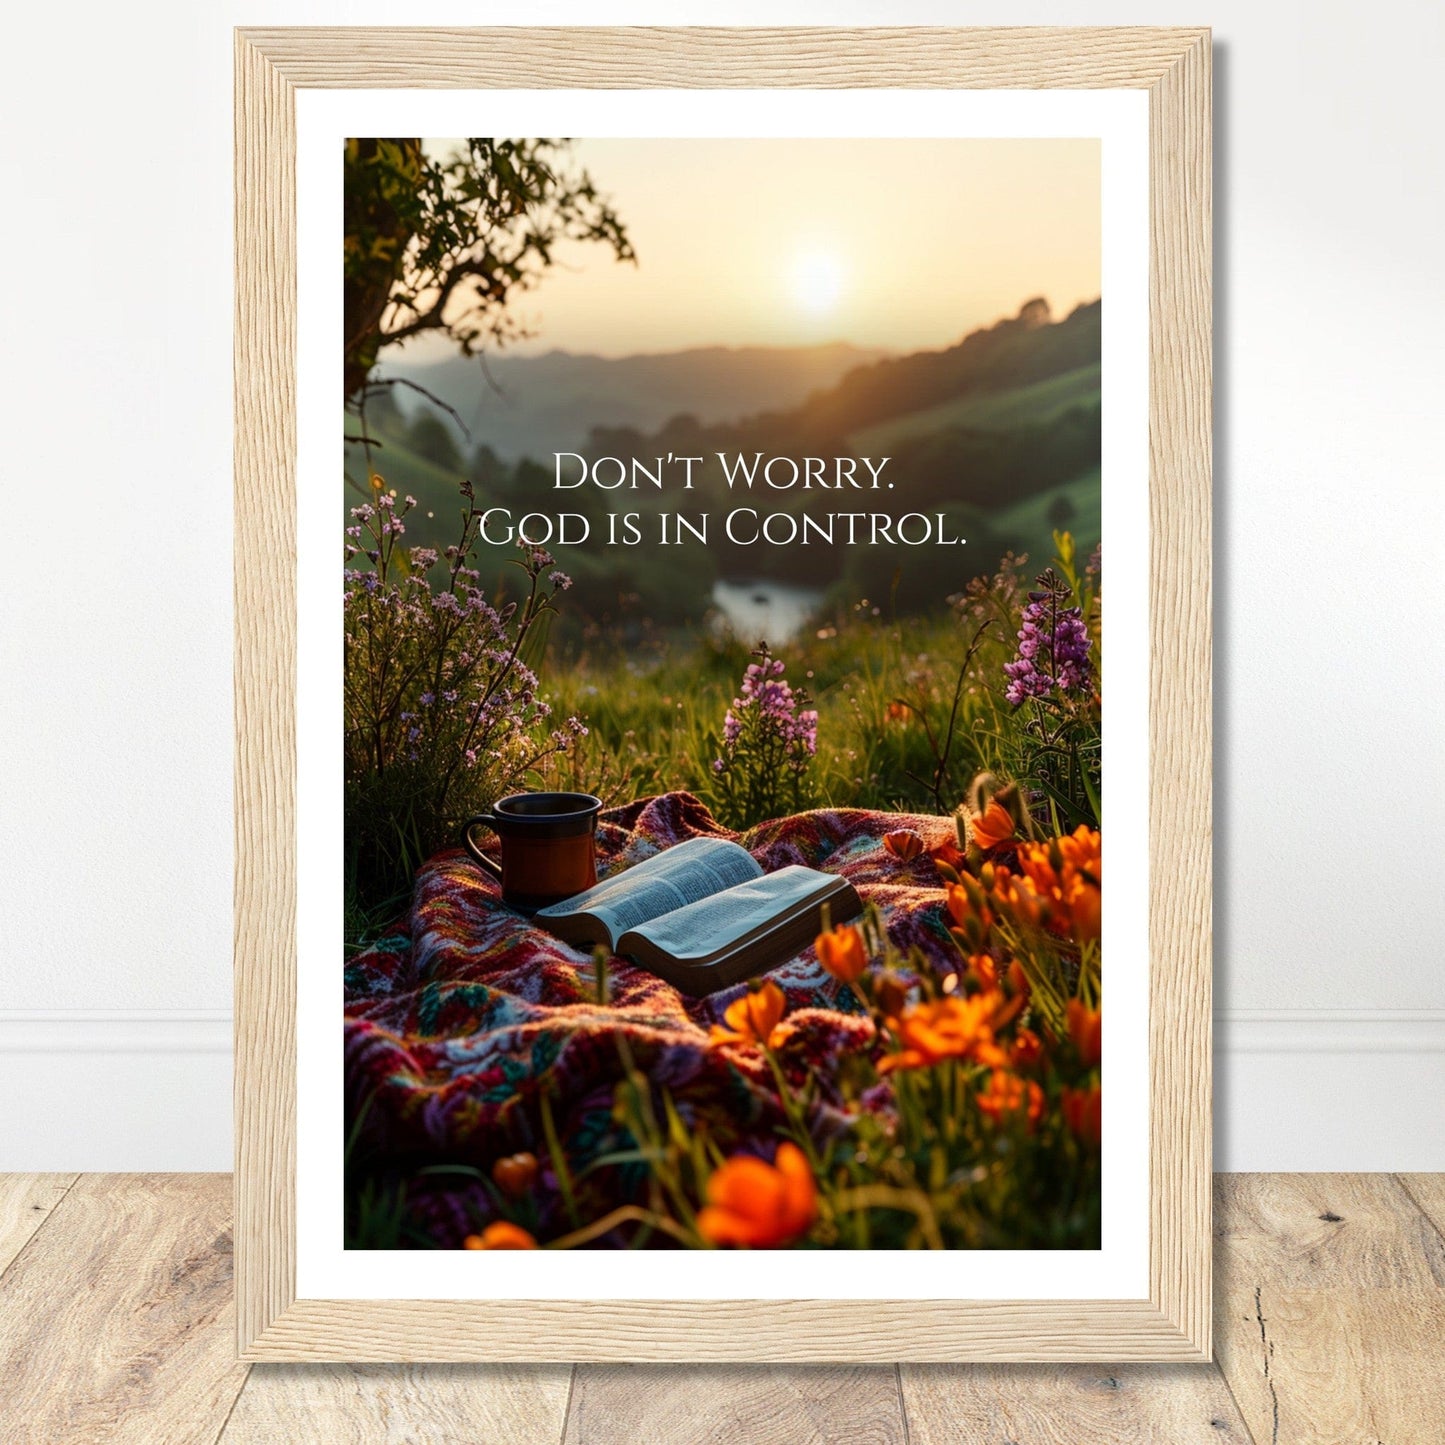 Coffee With My Father Print Material A4 21x29.7 cm / 8x12″ / Premium Matte Paper Wooden Framed Poster / Wood frame Premium Matte Paper Wooden Framed Poster